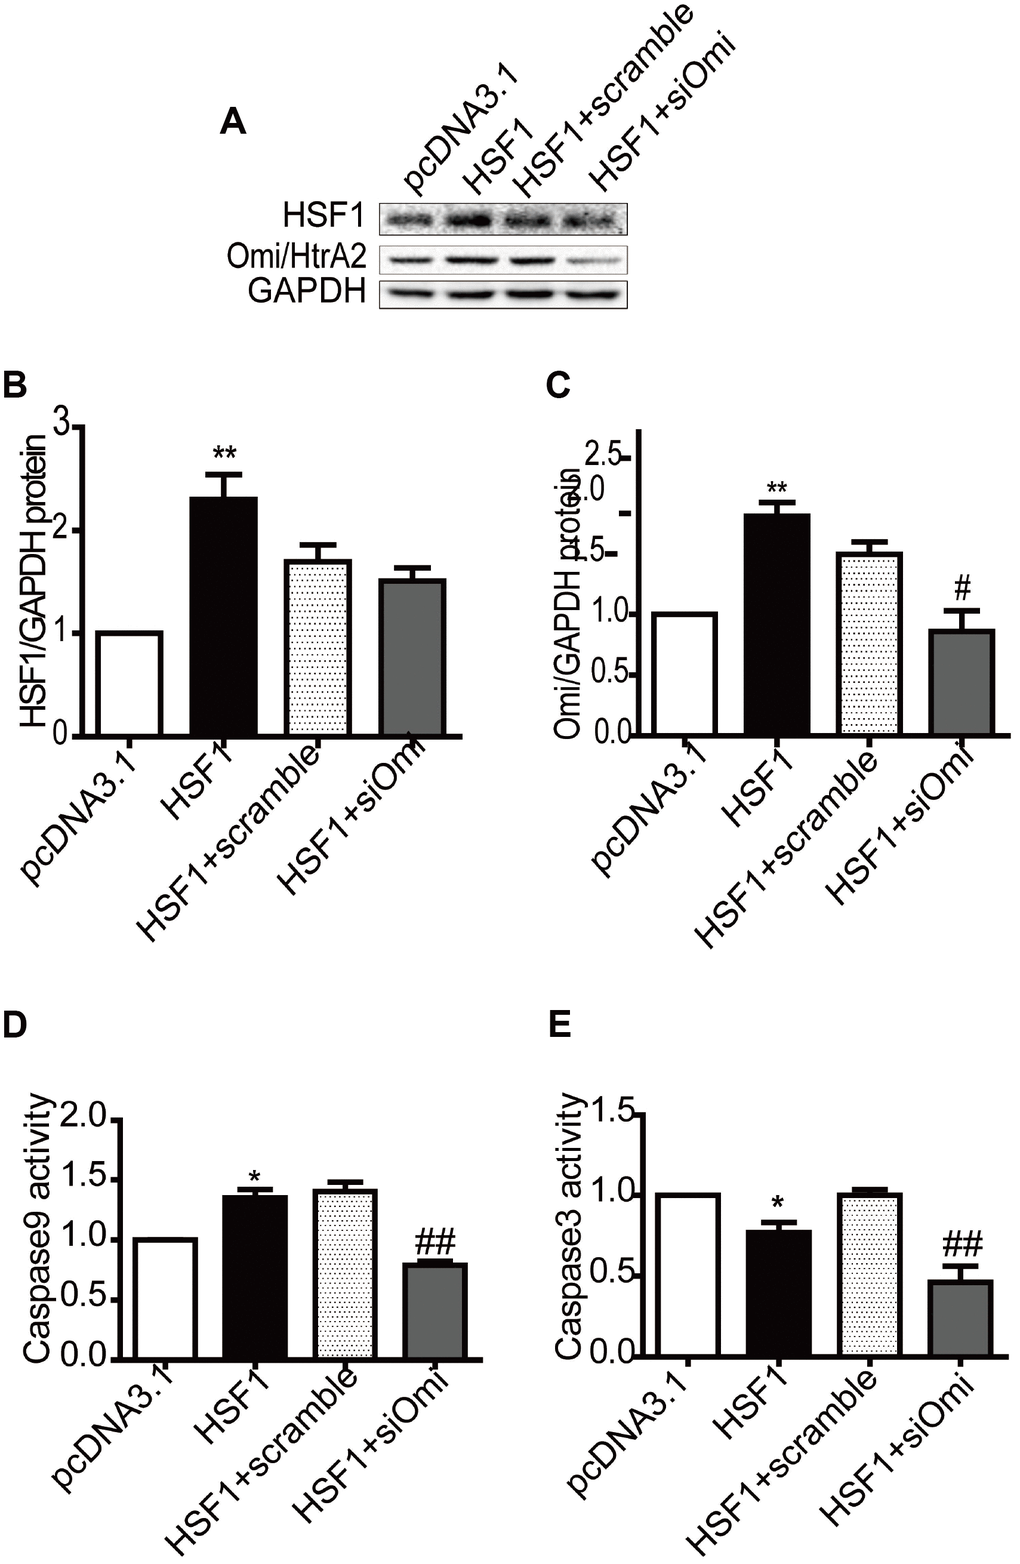 Overexpression of HSF1 participates in mitochondrial apoptosis by regulating Omi/HtrA2 expression in H9C2 cells. HSF1 expression increased after transfection of plasmid pcDNA3.1, which was not affected by RNAi Omi/HtrA2 (A, B). Omi/HtrA2 protein expression increased after transfection of plasmid pcDNA3.1, which decreased after RNAi Omi/HtrA2 (A, C). Caspase -9 activity was induced by HSF1 overexpression, which was reversed after transient transfection of si-Omi/HtrA2 (D). Caspase-3 activity was suppressed by HSF1 overexpression, but similar change was detected after RNAi using Omi/HtrA2 (E). Data are represented as mean +/- SEM. *PPvs. pcDNA3.1, #P##Pvs. HSF1+scramble, n = 4.